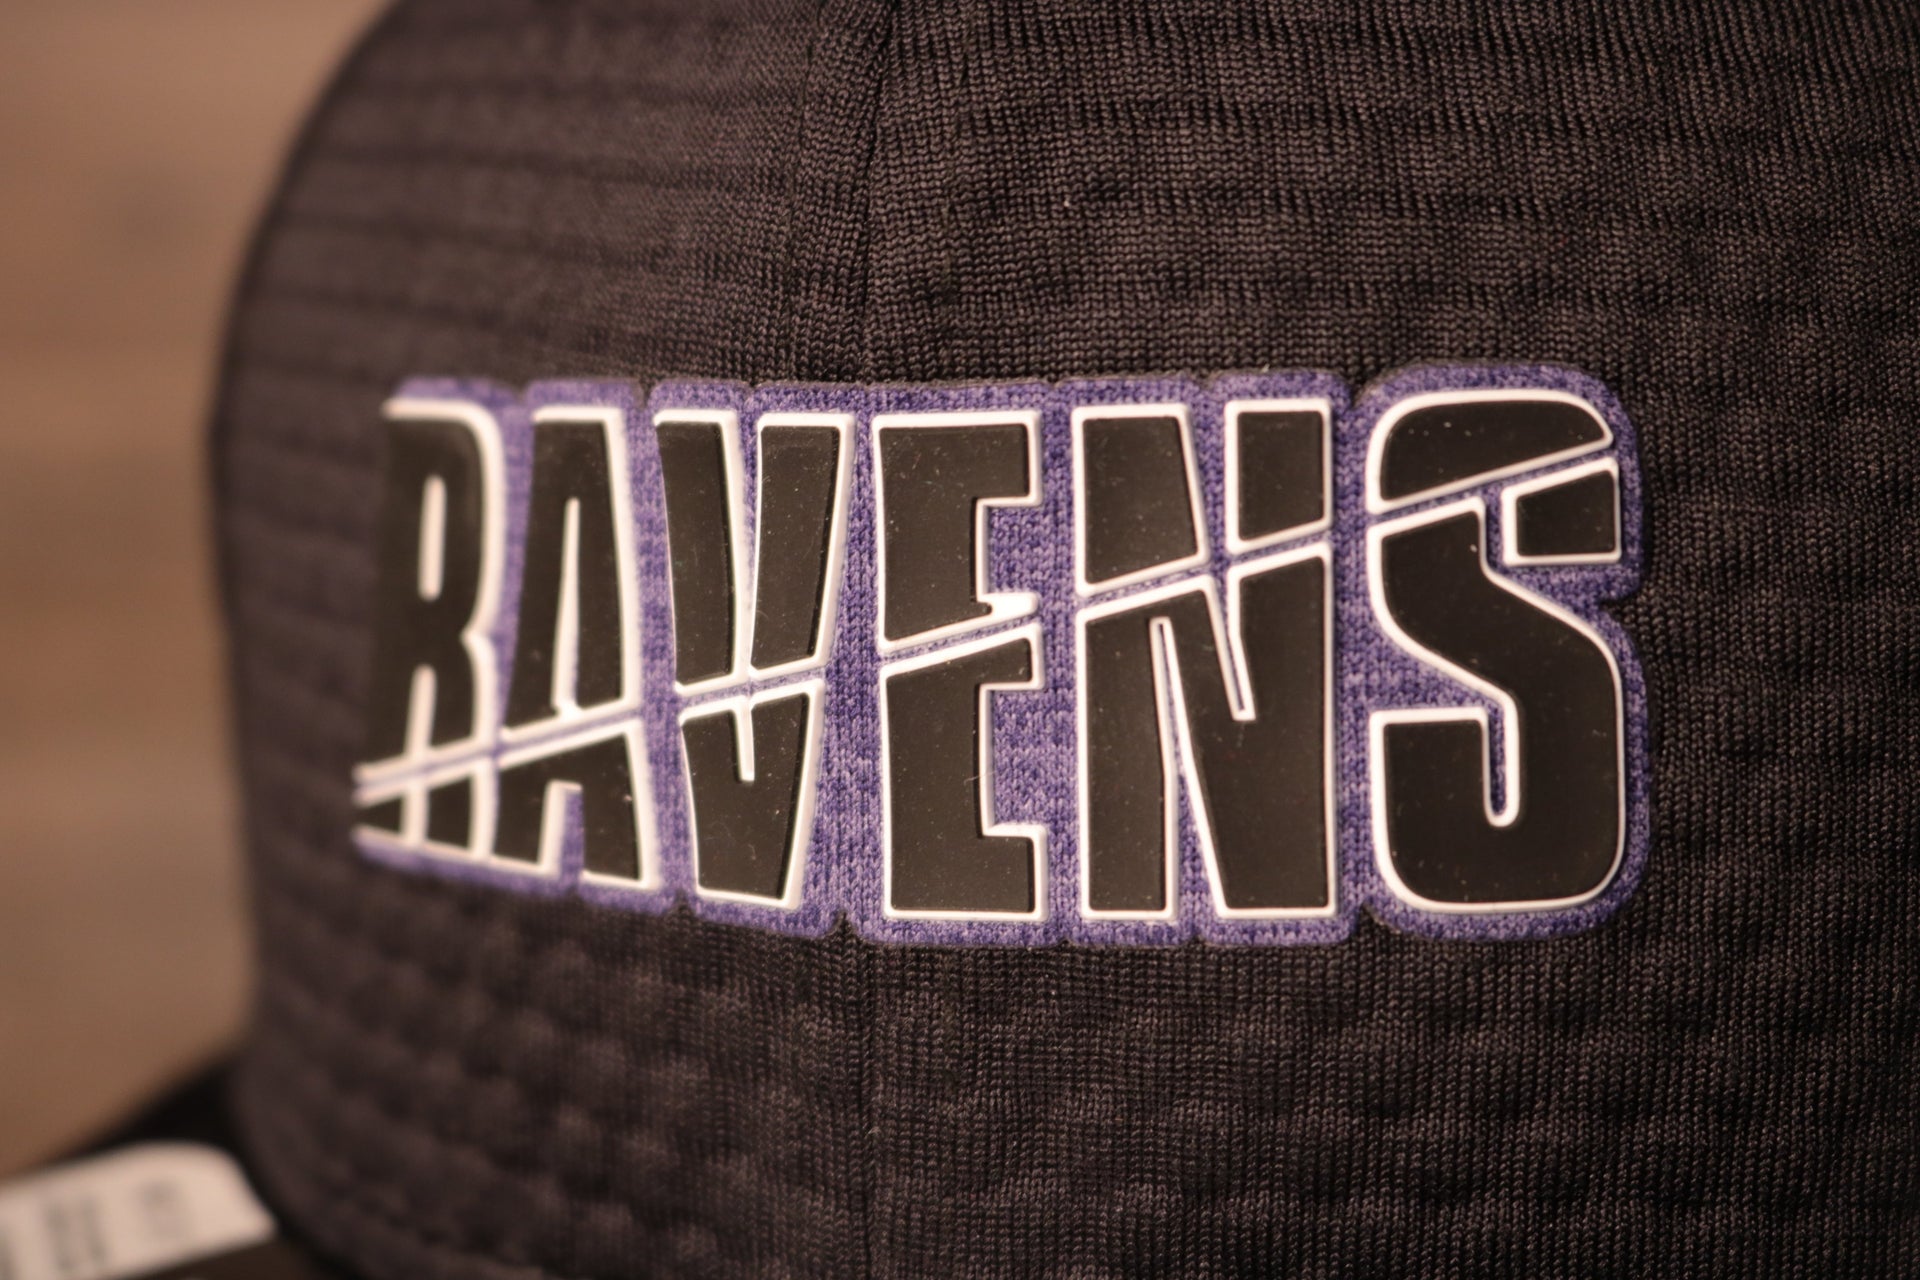 Ravens 2020 Training Camp Snapback Hat | Baltimore 2020 On-Field Black Training Camp Snap Cap the ravens logo is purple with a back background